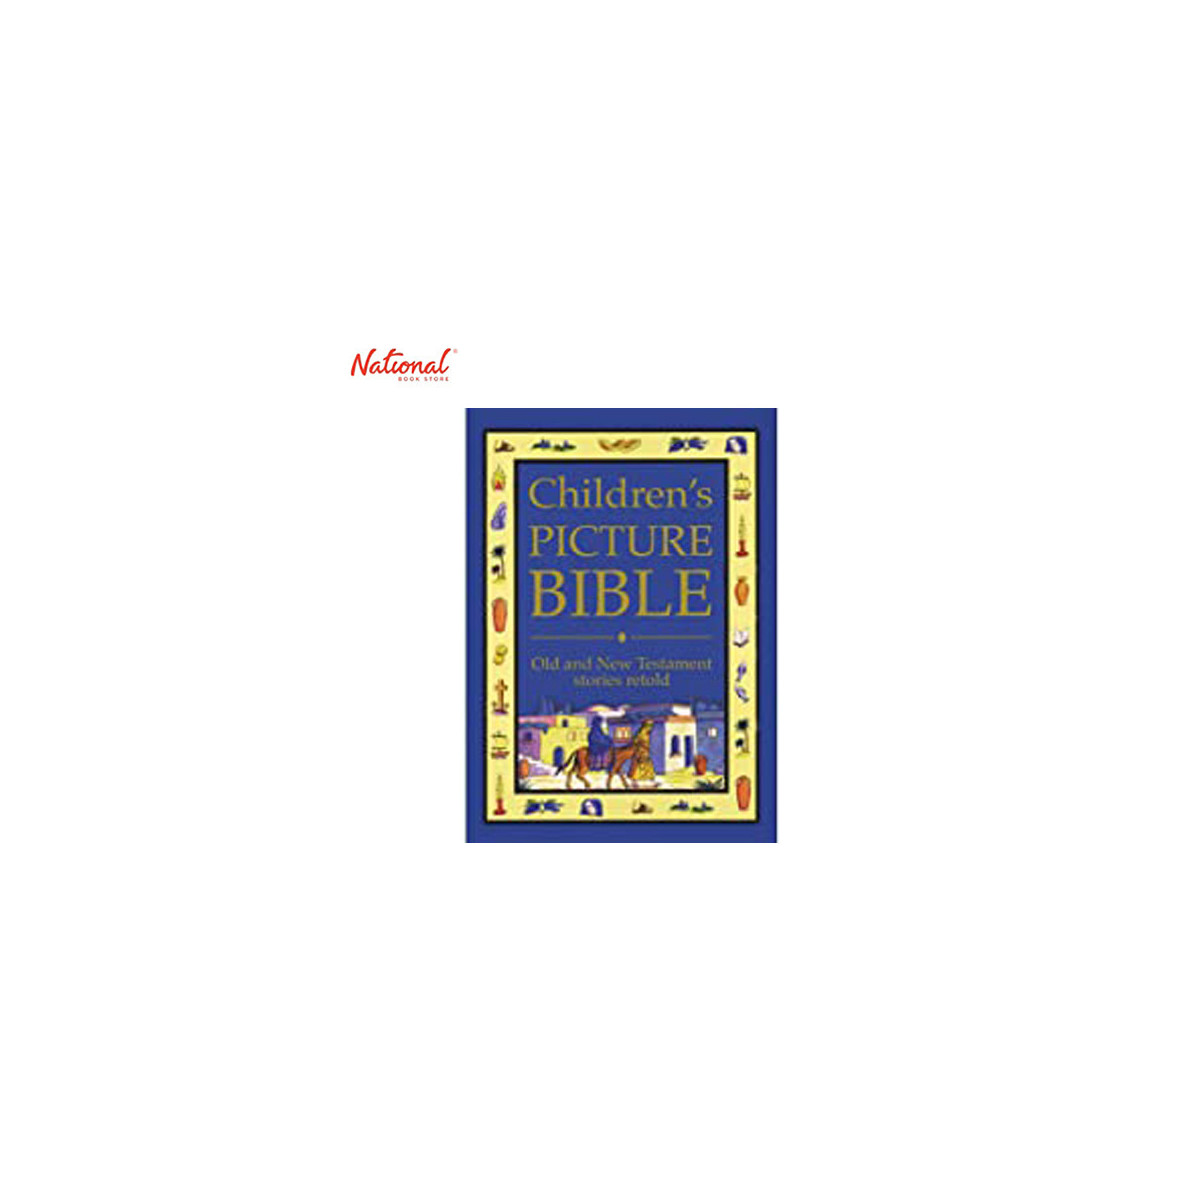 CHILDREN'S PICTURE BIBLE